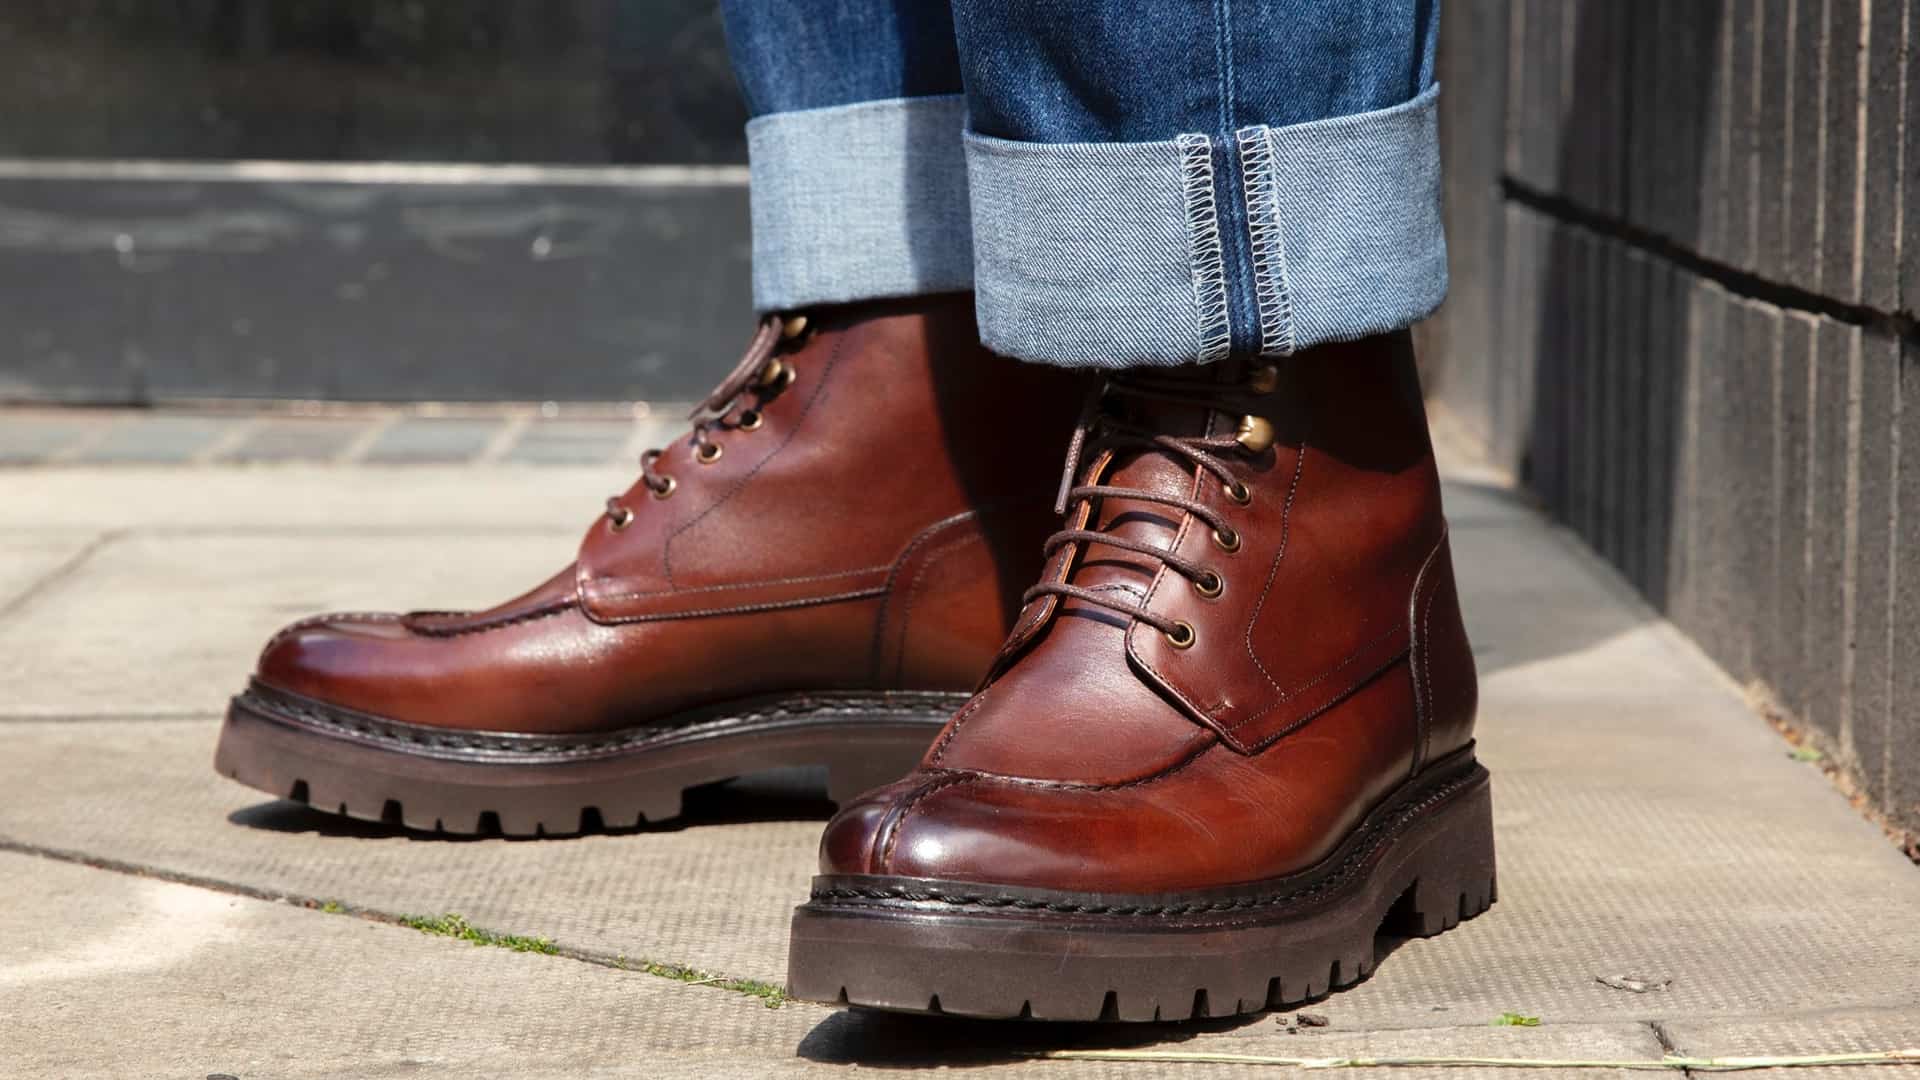 The Most Expensive Work Boot Brands (And Are They Worth The Money?)